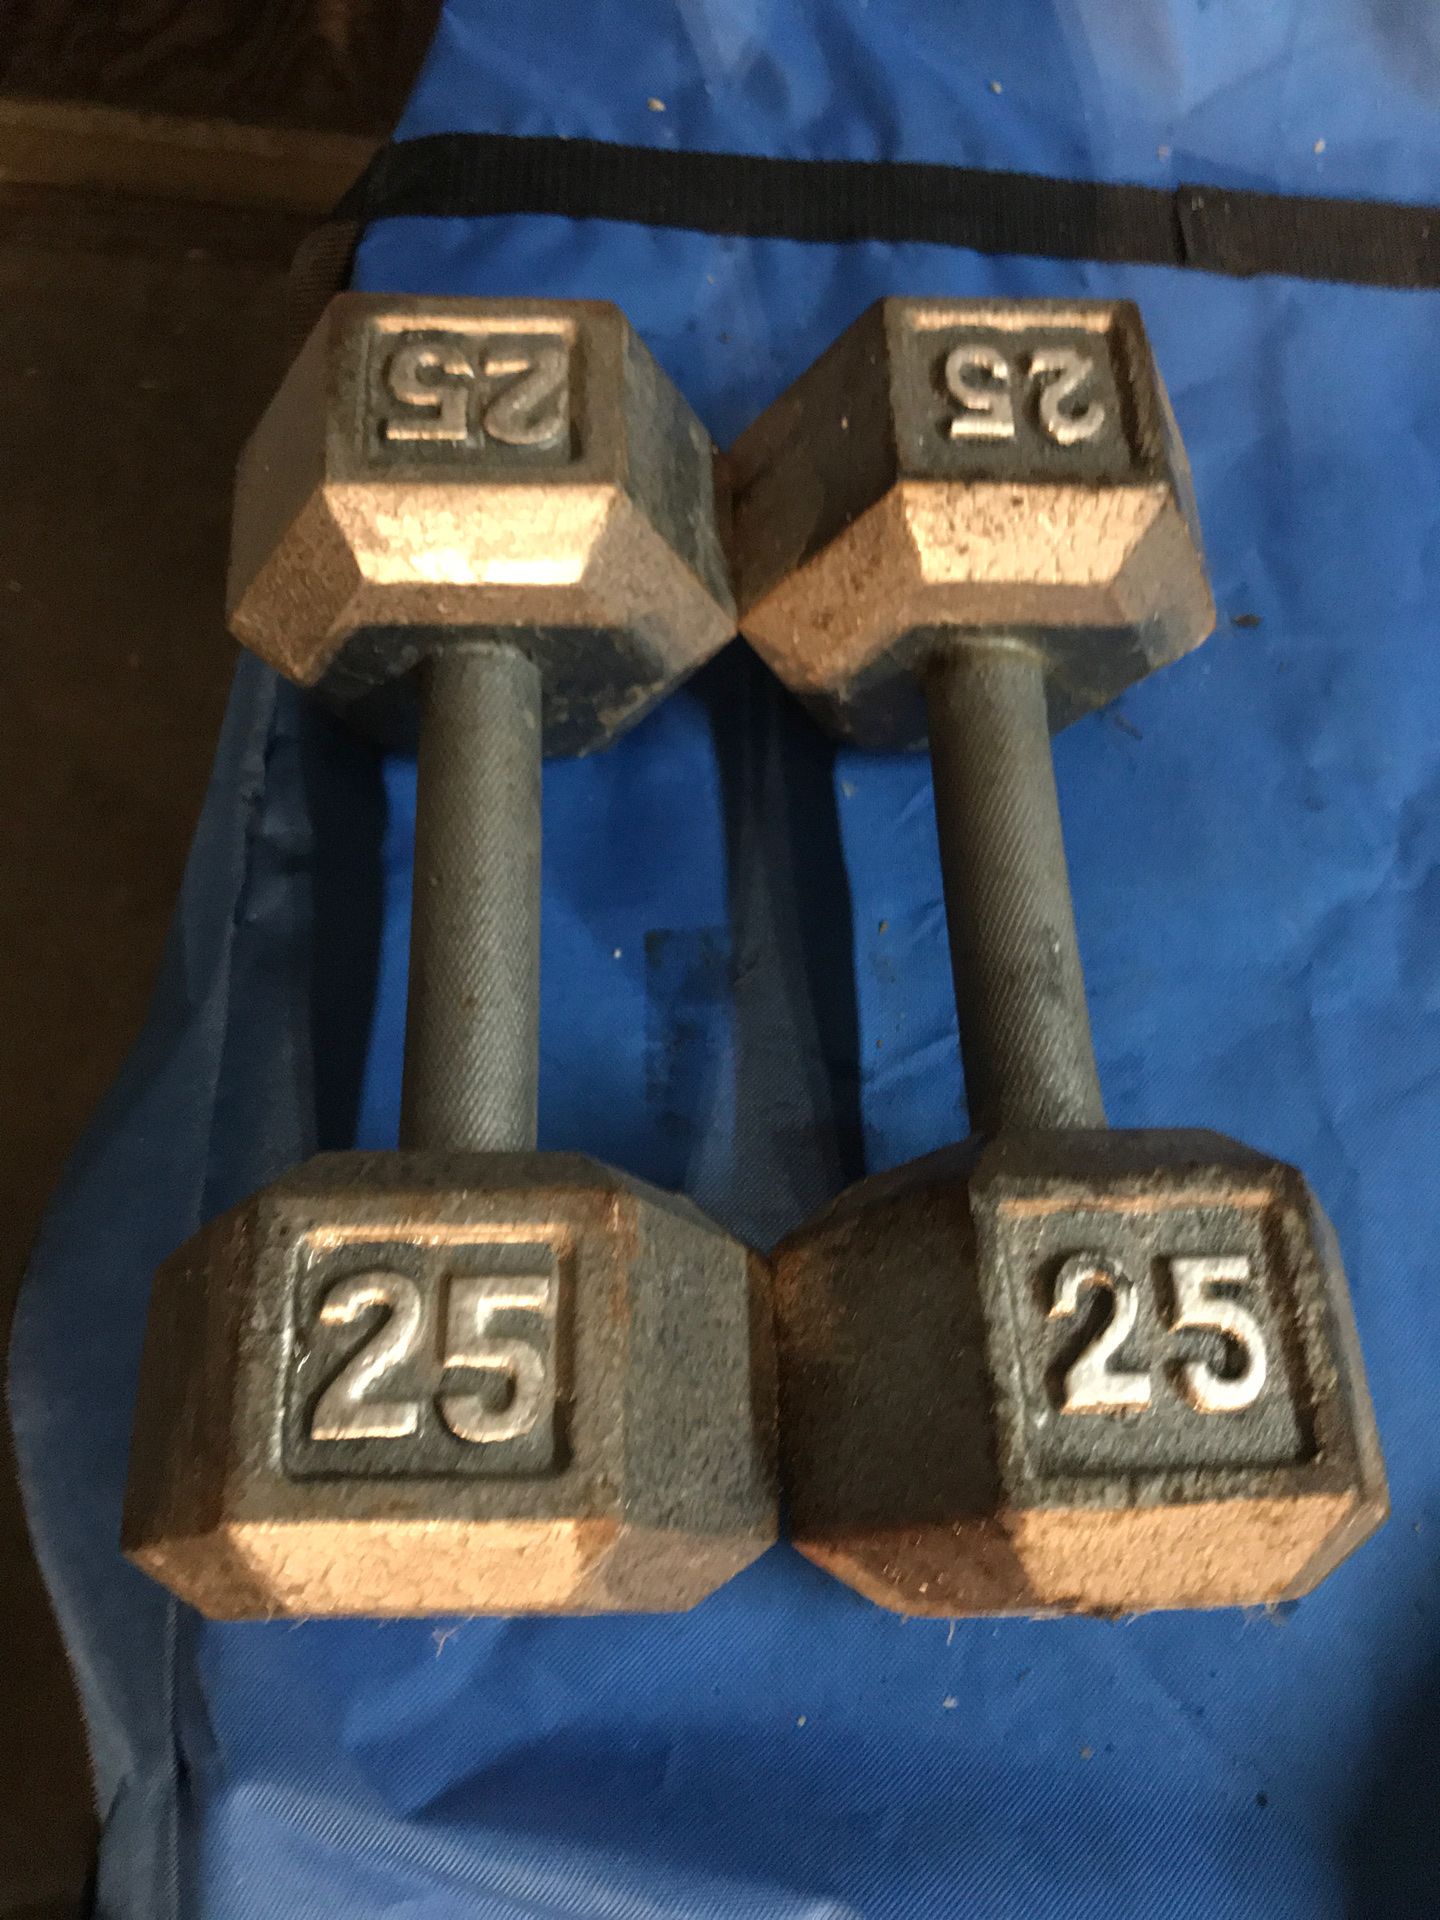 Cap barbell dumbbells 25 lbs weighs for home gym